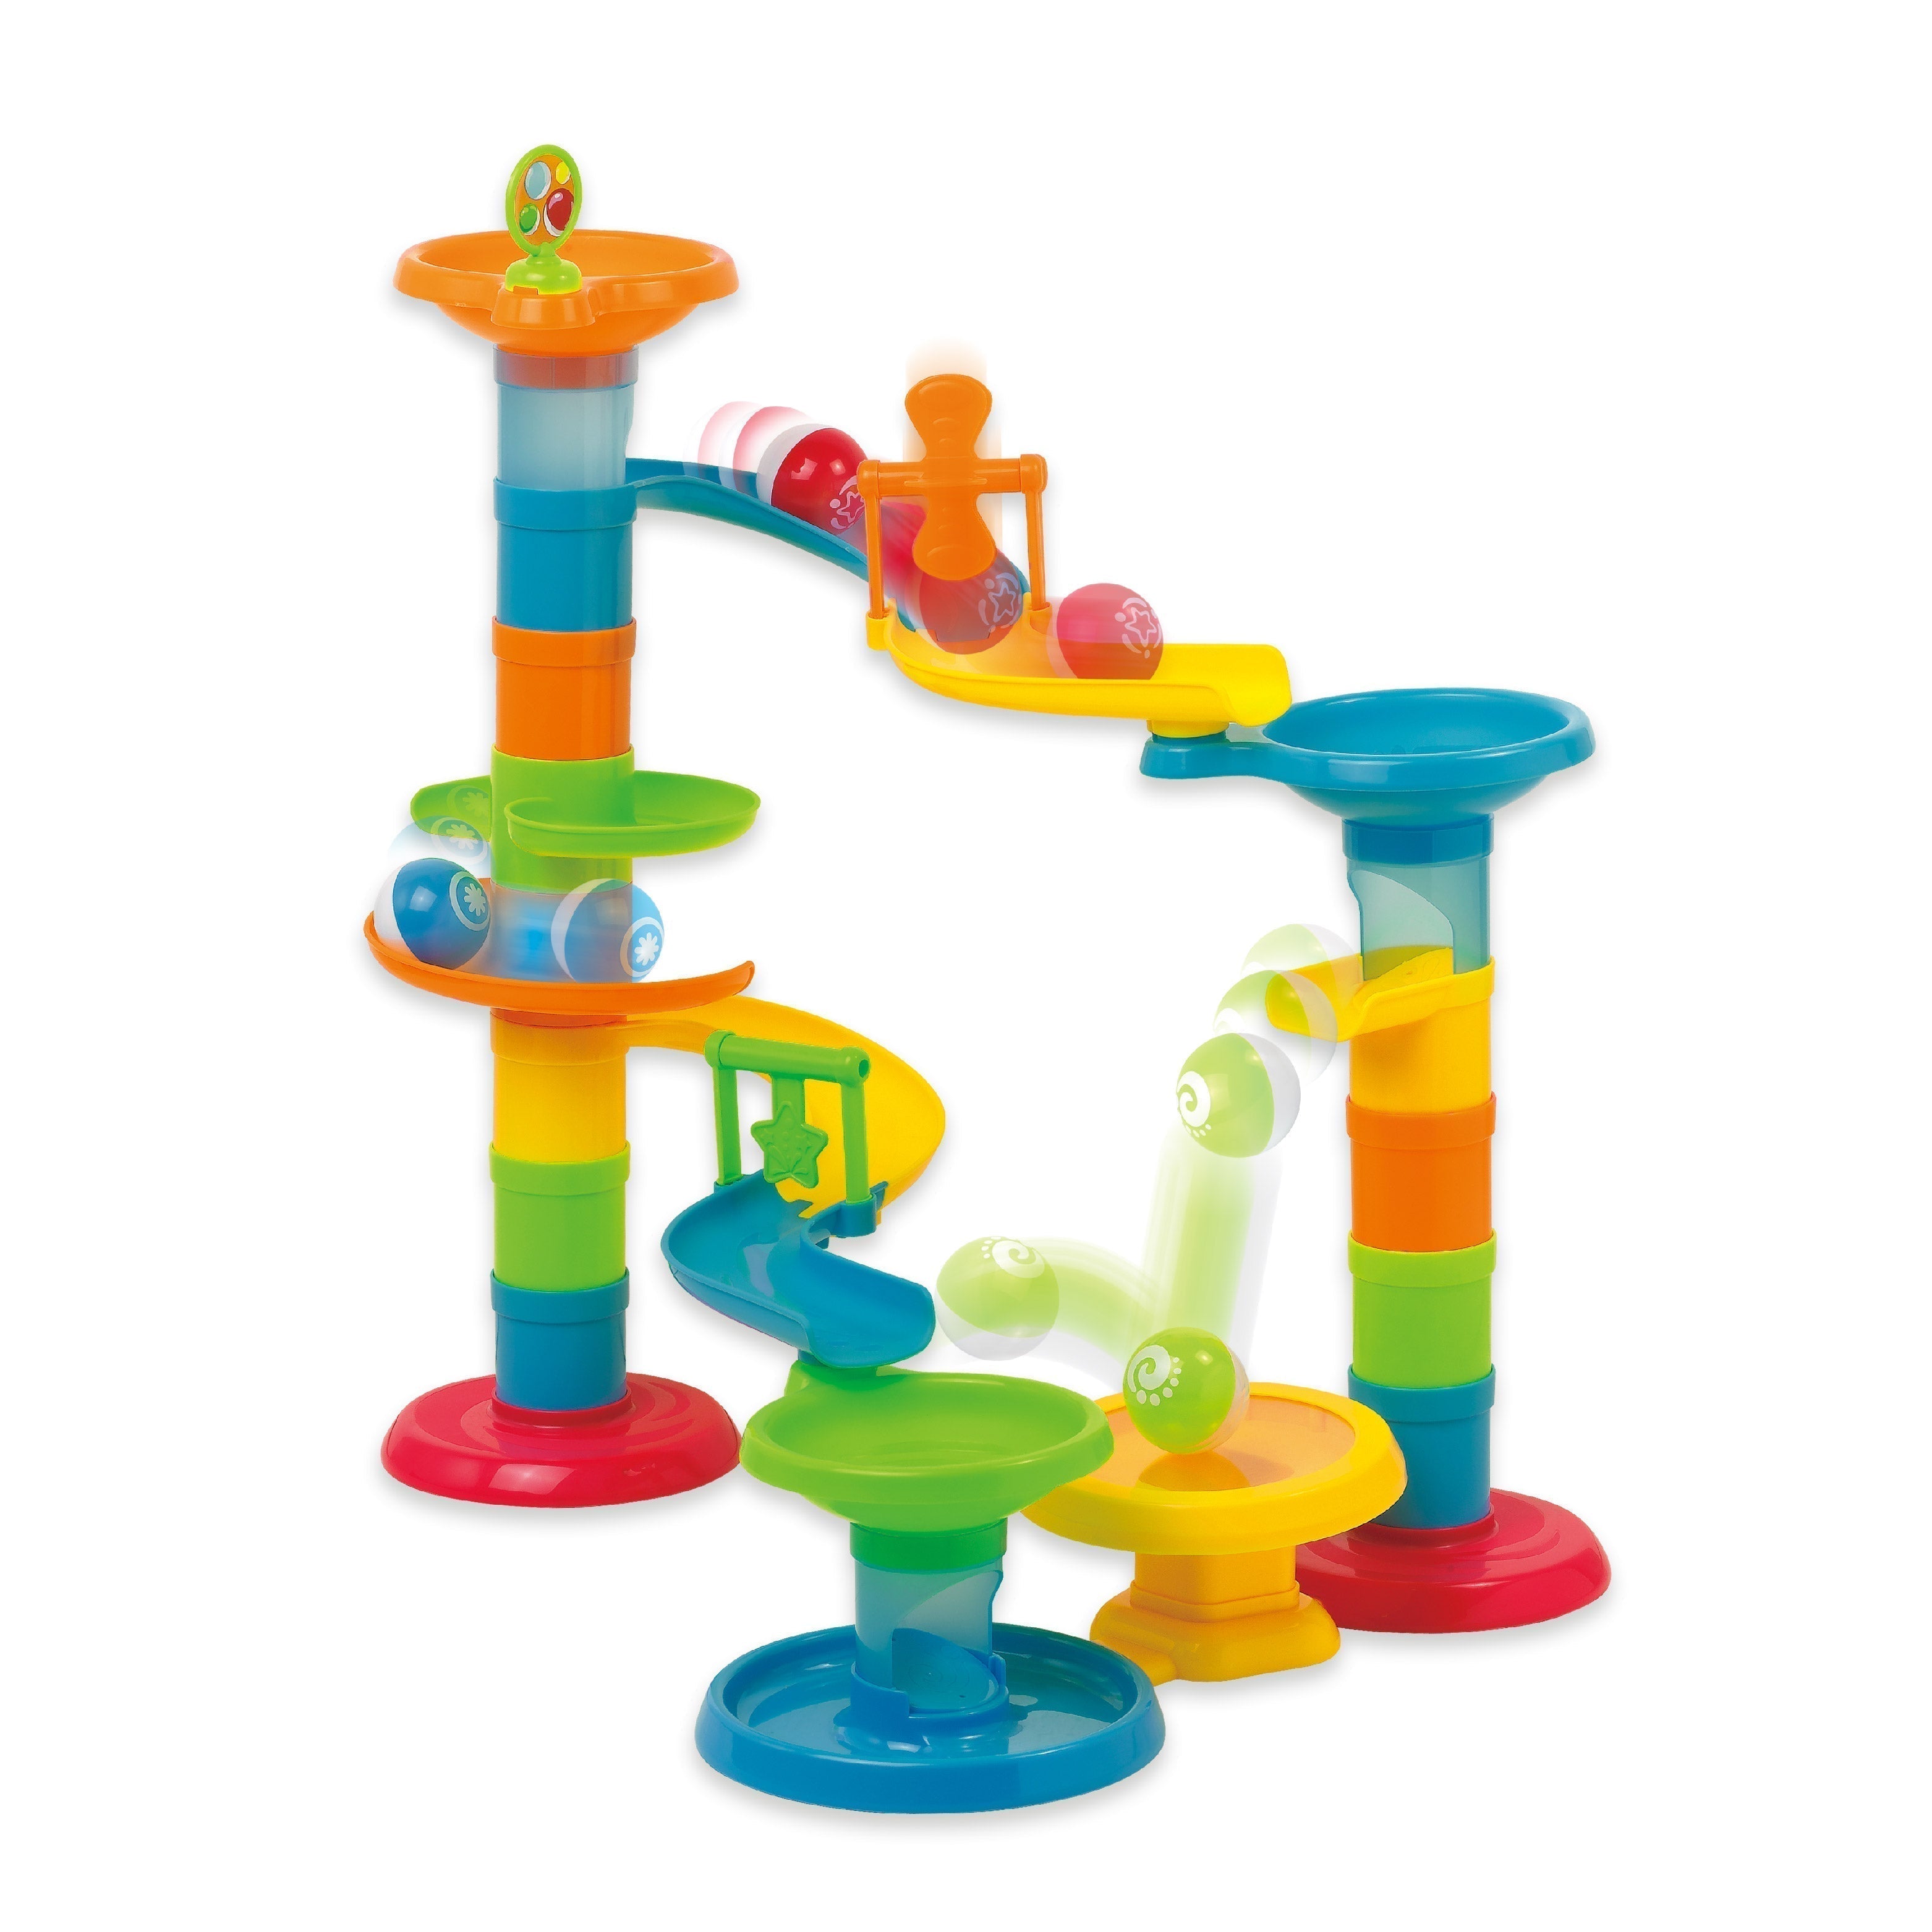 Edushape Bounce A Marble Racetrack, Edushape's Bounce A Marble Racetrack provides hours of visually stimulating fun rolling the balls through the track. Simple stacking set builds coordination, reasoning and fine motor skills with a surprise. Pieces are perfectly sized for smaller hands and slow-rolling balls keep young children fascinated. Track pieces are brightly colored for color matching. Includes pieces that bounce the balls on their way through the track! Set includes 30 pieces. For ages 12 months an